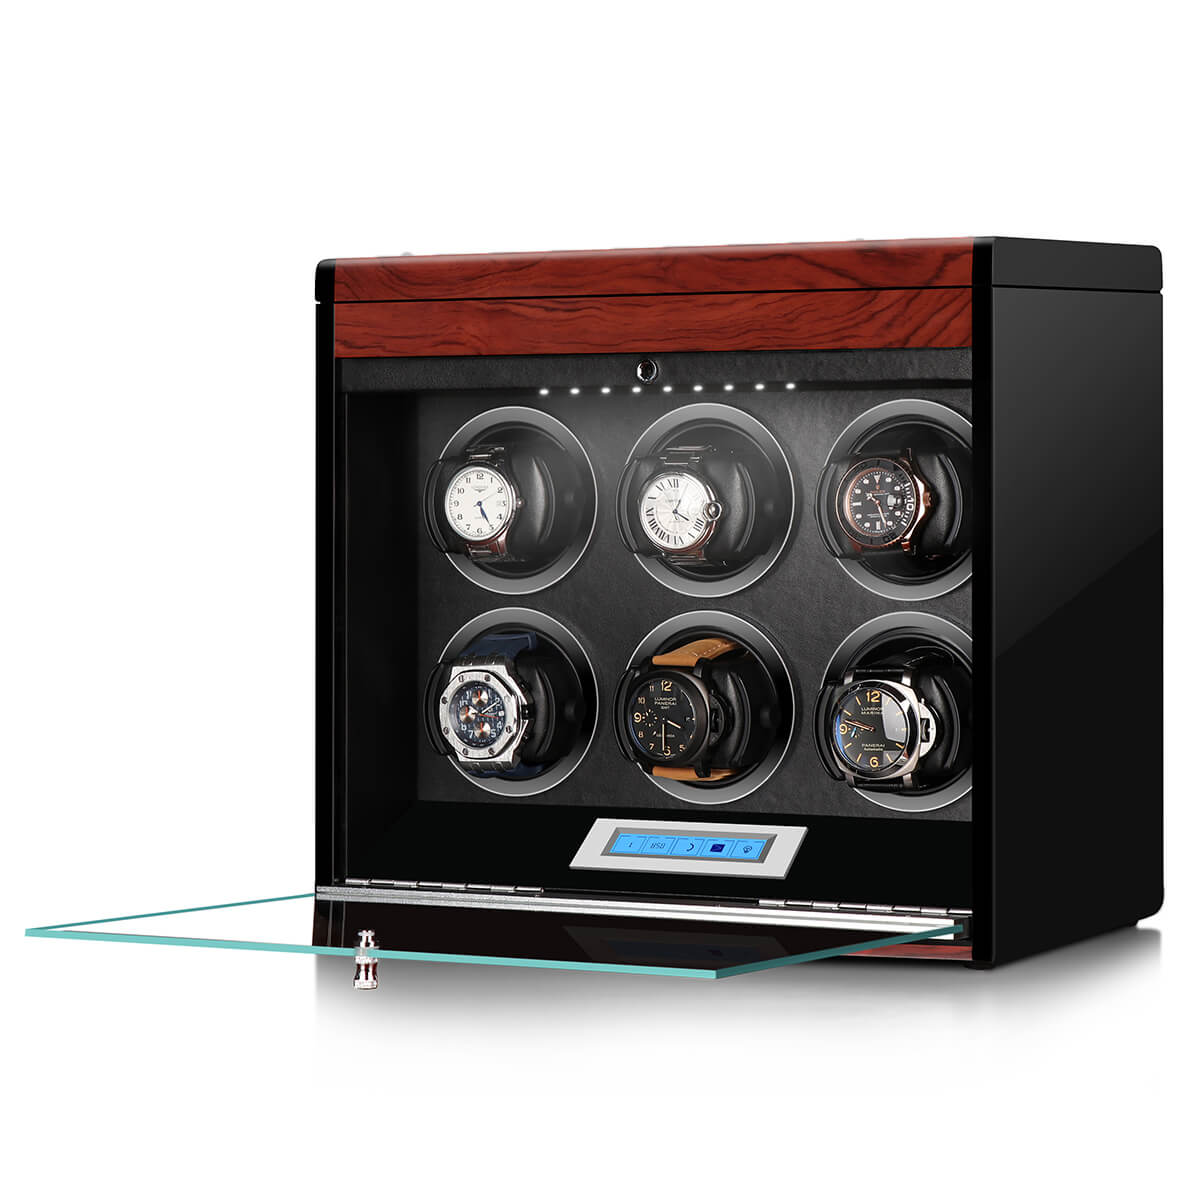 6 Watch Winder with Extra Storage with Wood Veneer Finish by Aevitas